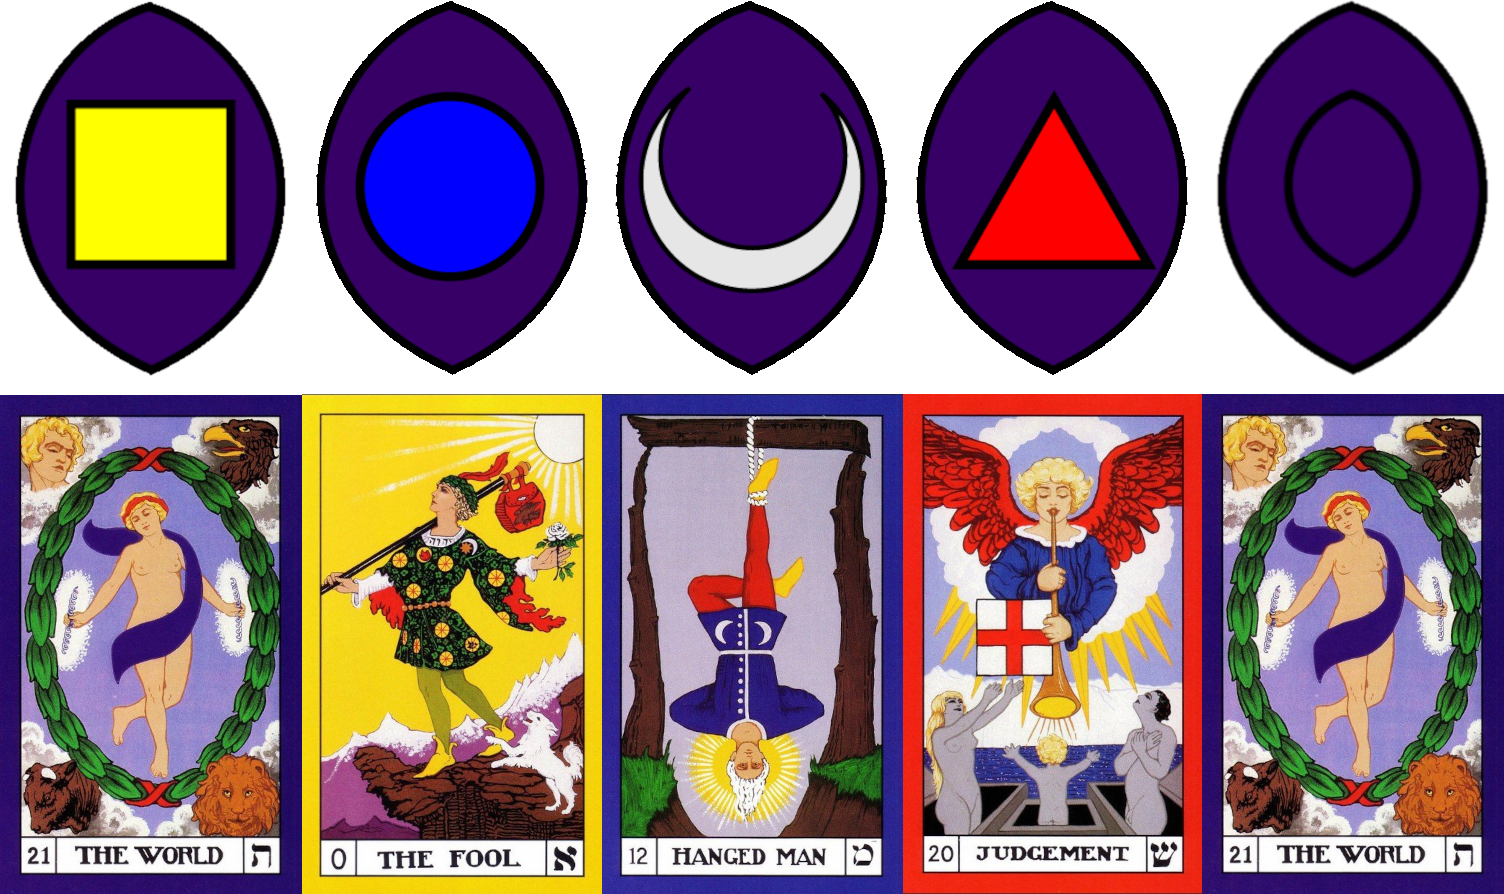 The five tattwas: Akasha (spirit), Tejas (fire), Apas (water), Vayu (air), and Prithivi (earth), and the corresponding Major Arcana cards.